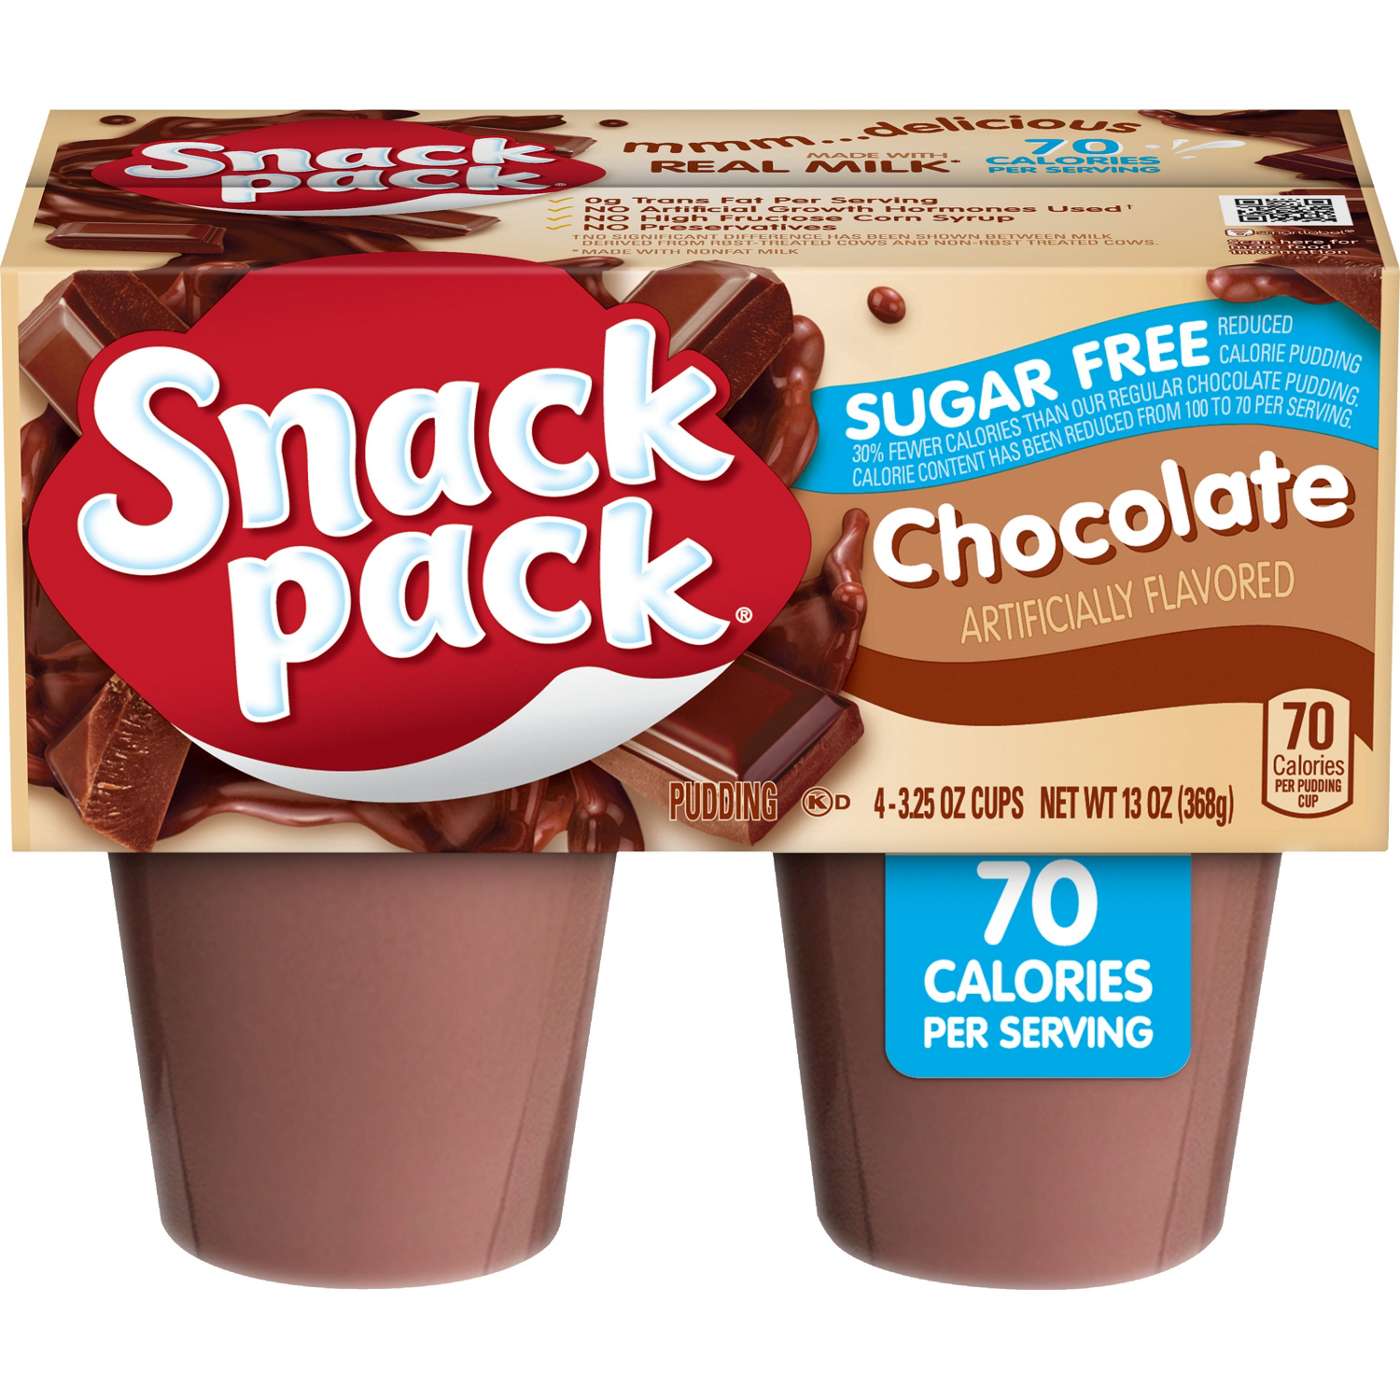 Snack Pack Sugar Free Chocolate Pudding Cups; image 1 of 7